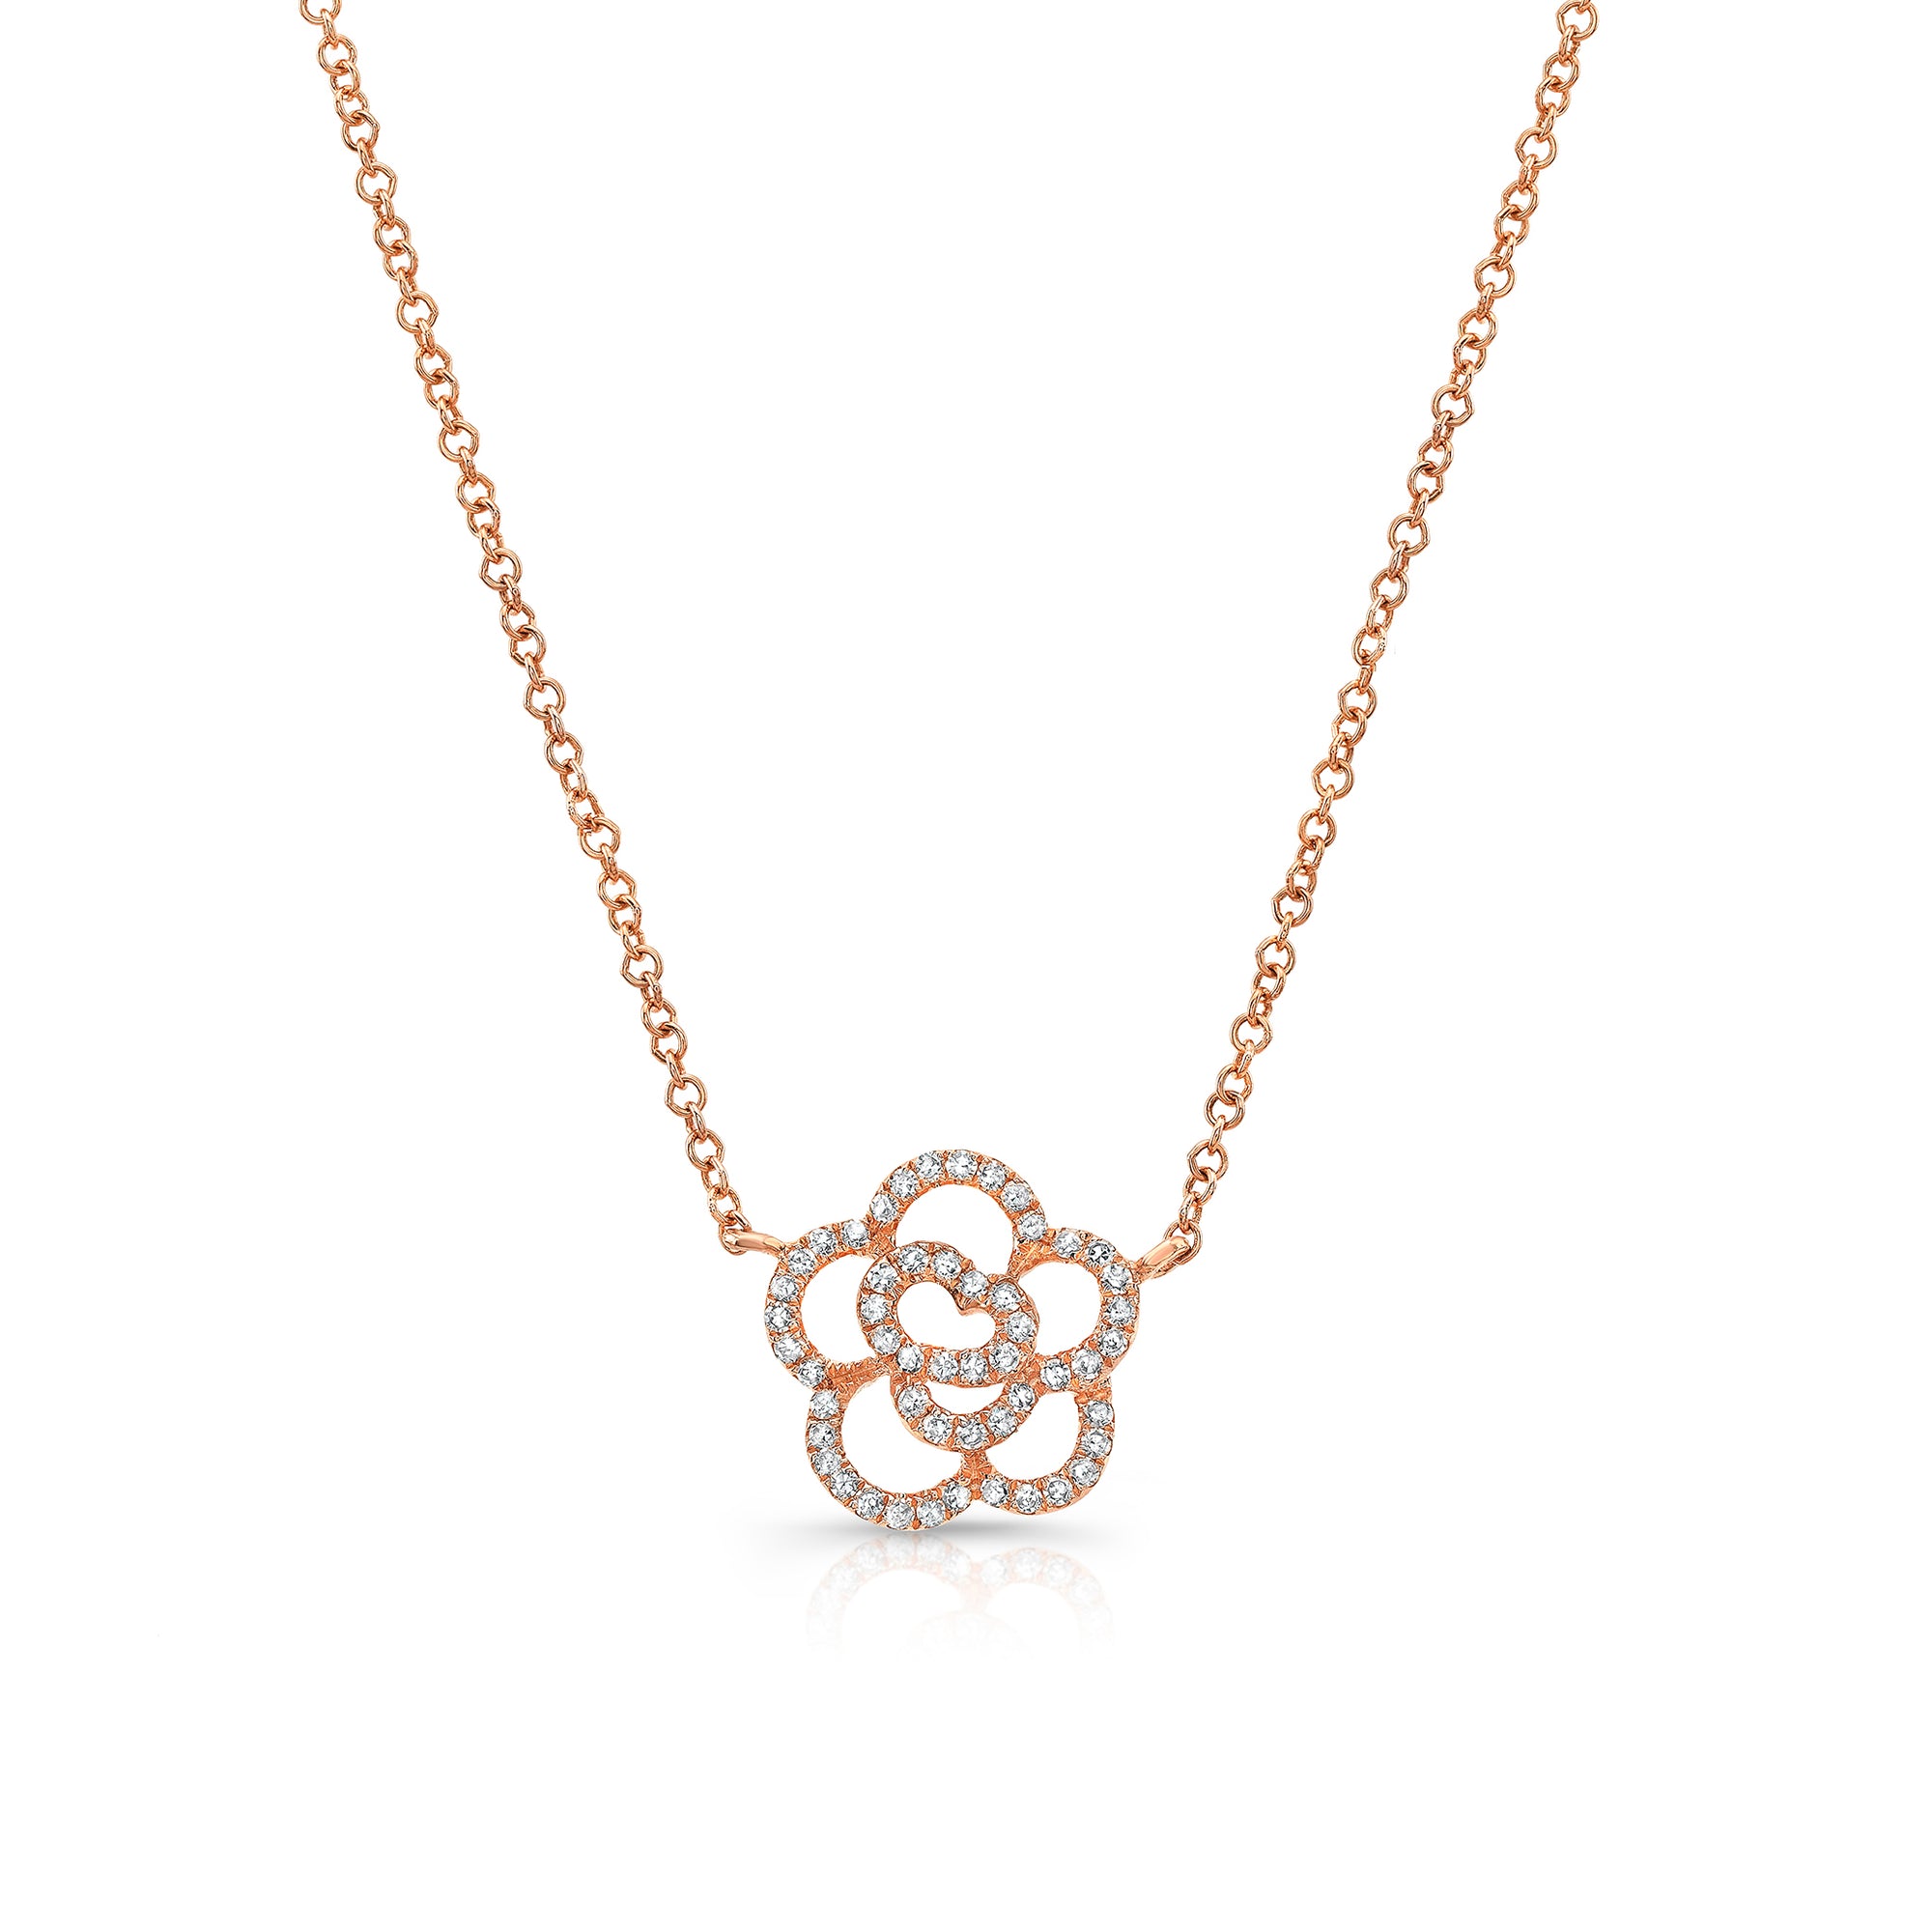 Diamond Flower Outline Pendant Necklace  -14K gold weighing 2.00 grams  -52 round pave-set diamonds totaling 0.16 carats